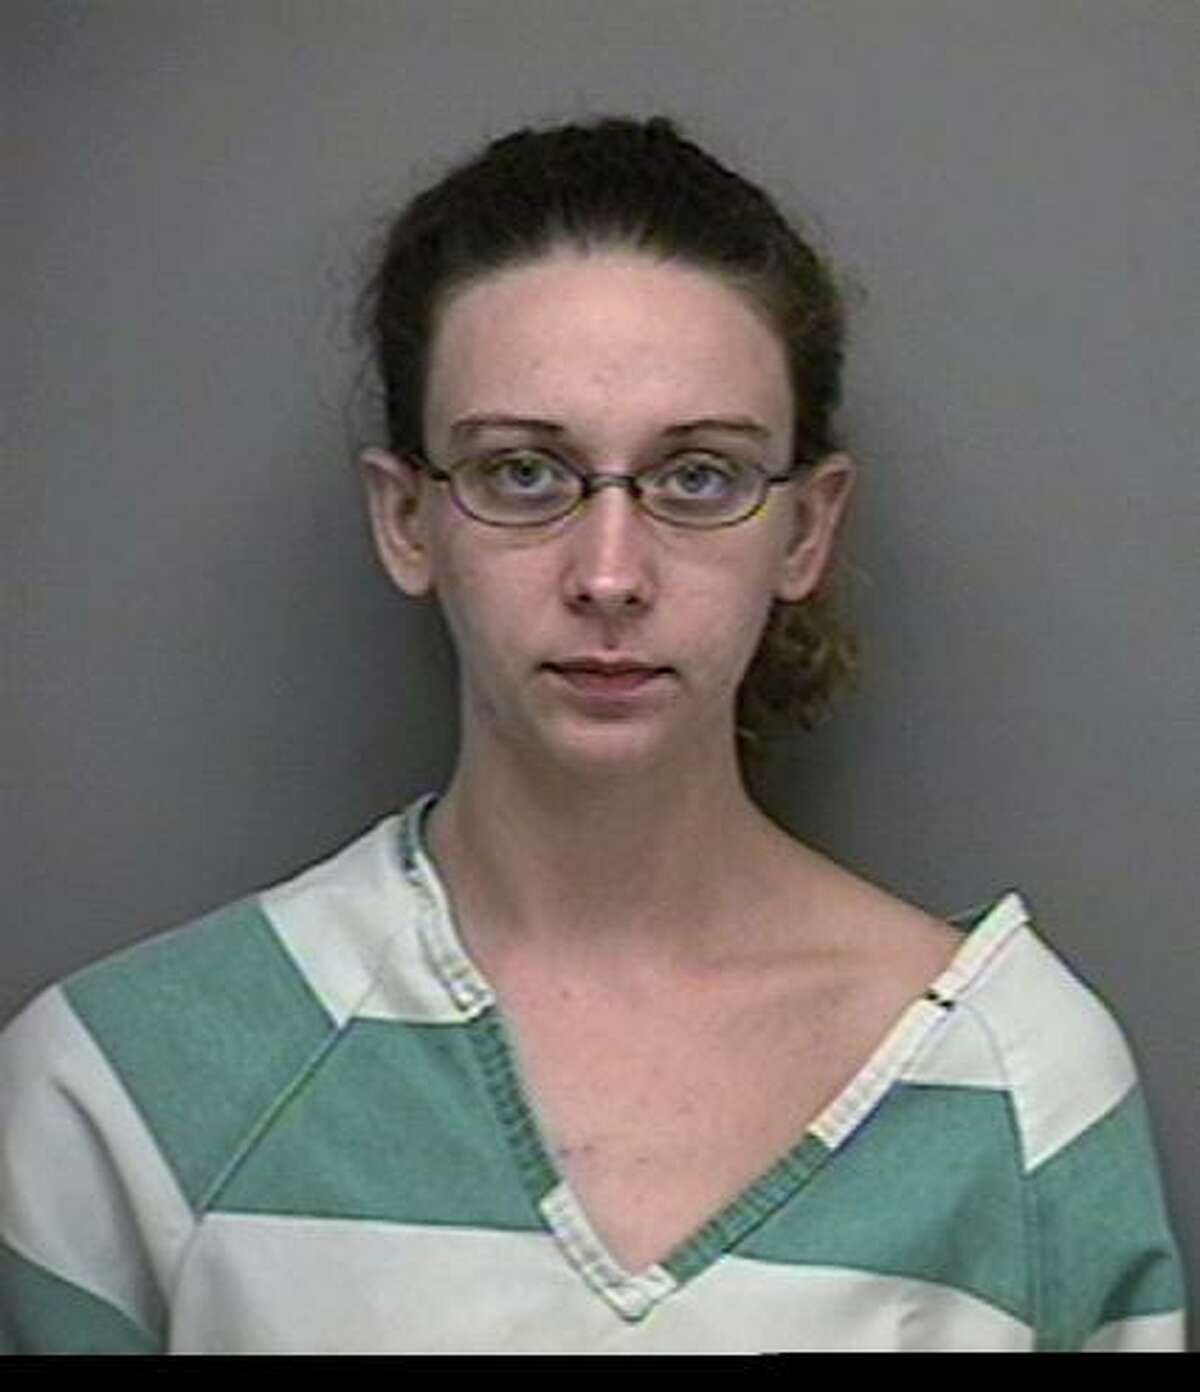 Lindsey Marlana Shirer is wanted by the Montgomery County Sheriff's Office on a charge of driving while intoxicated.